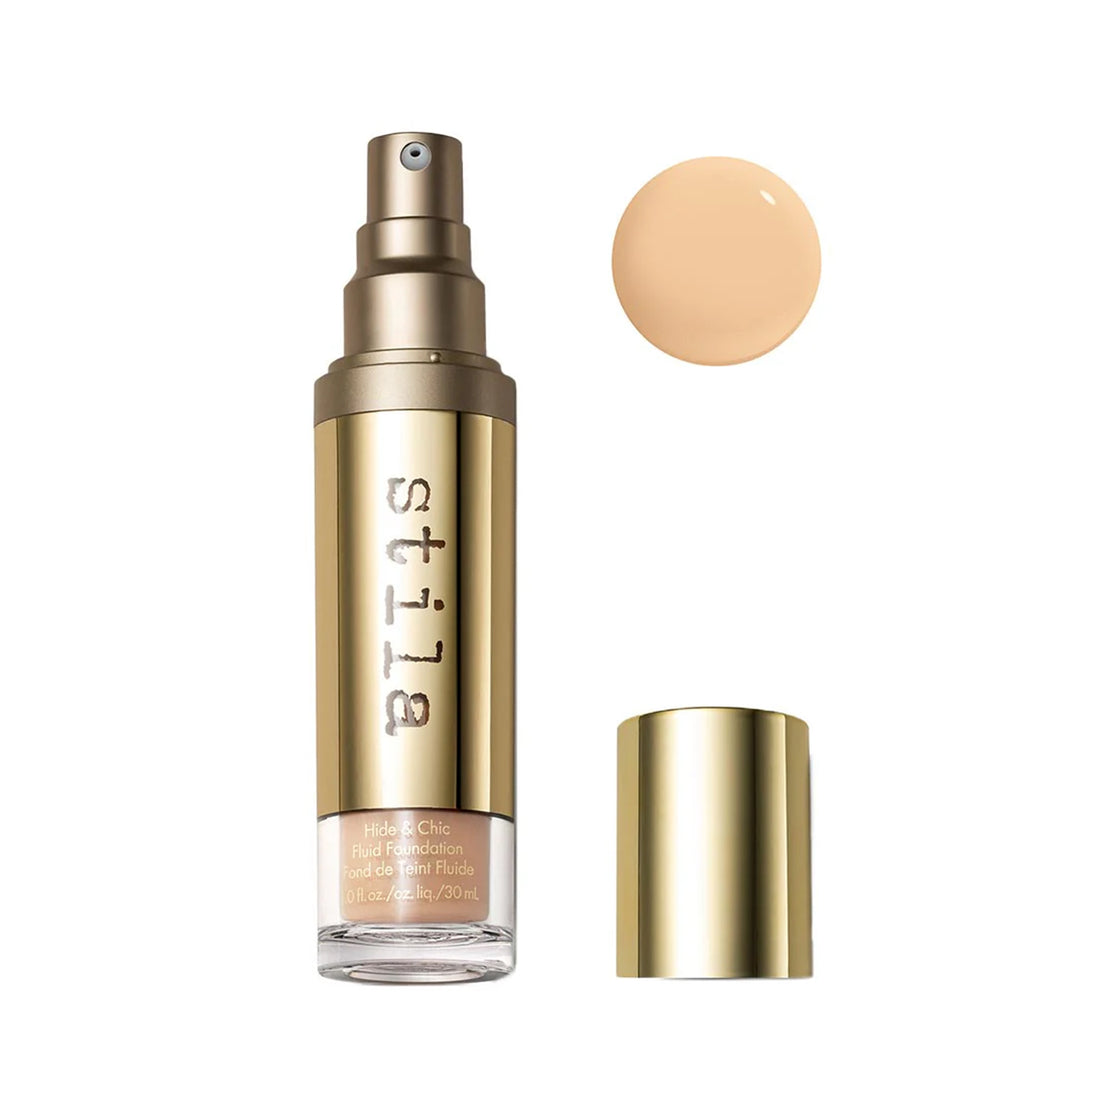 Hide and Chic Fluid Foundation